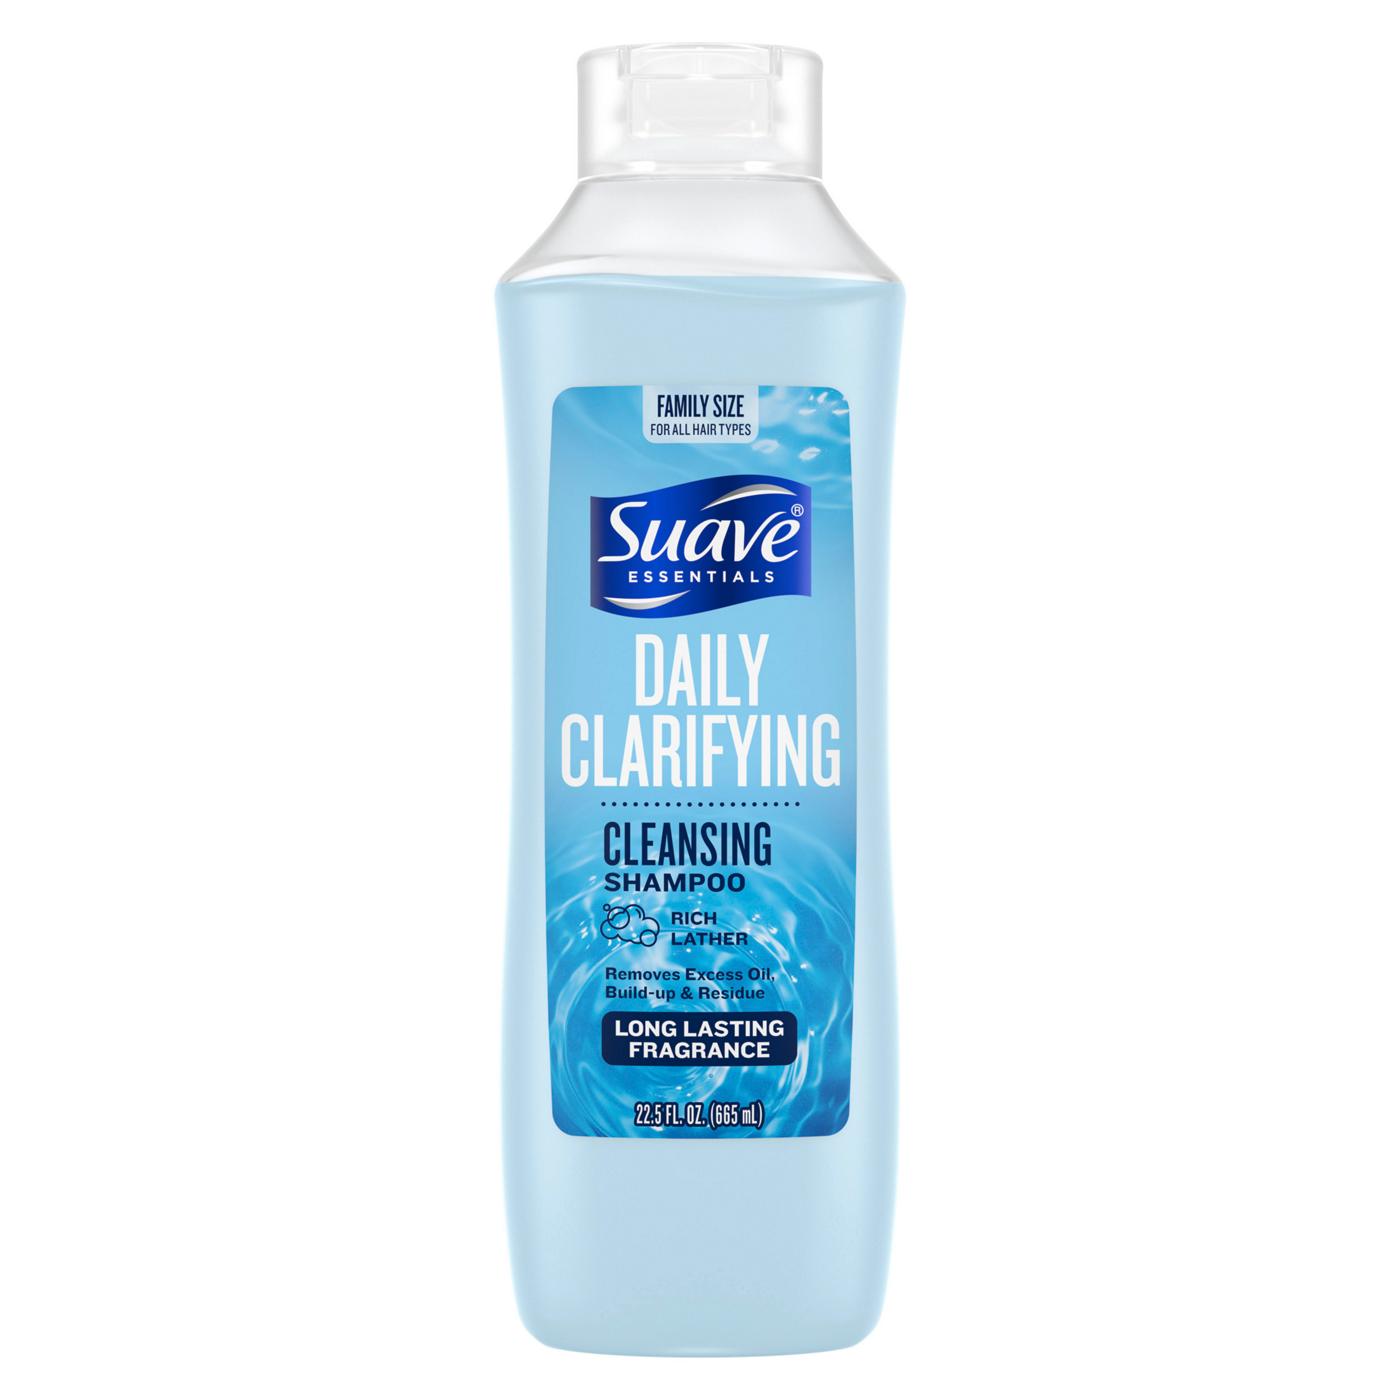 Suave Essentials Cleansing Shampoo - Daily Clarifying; image 1 of 3